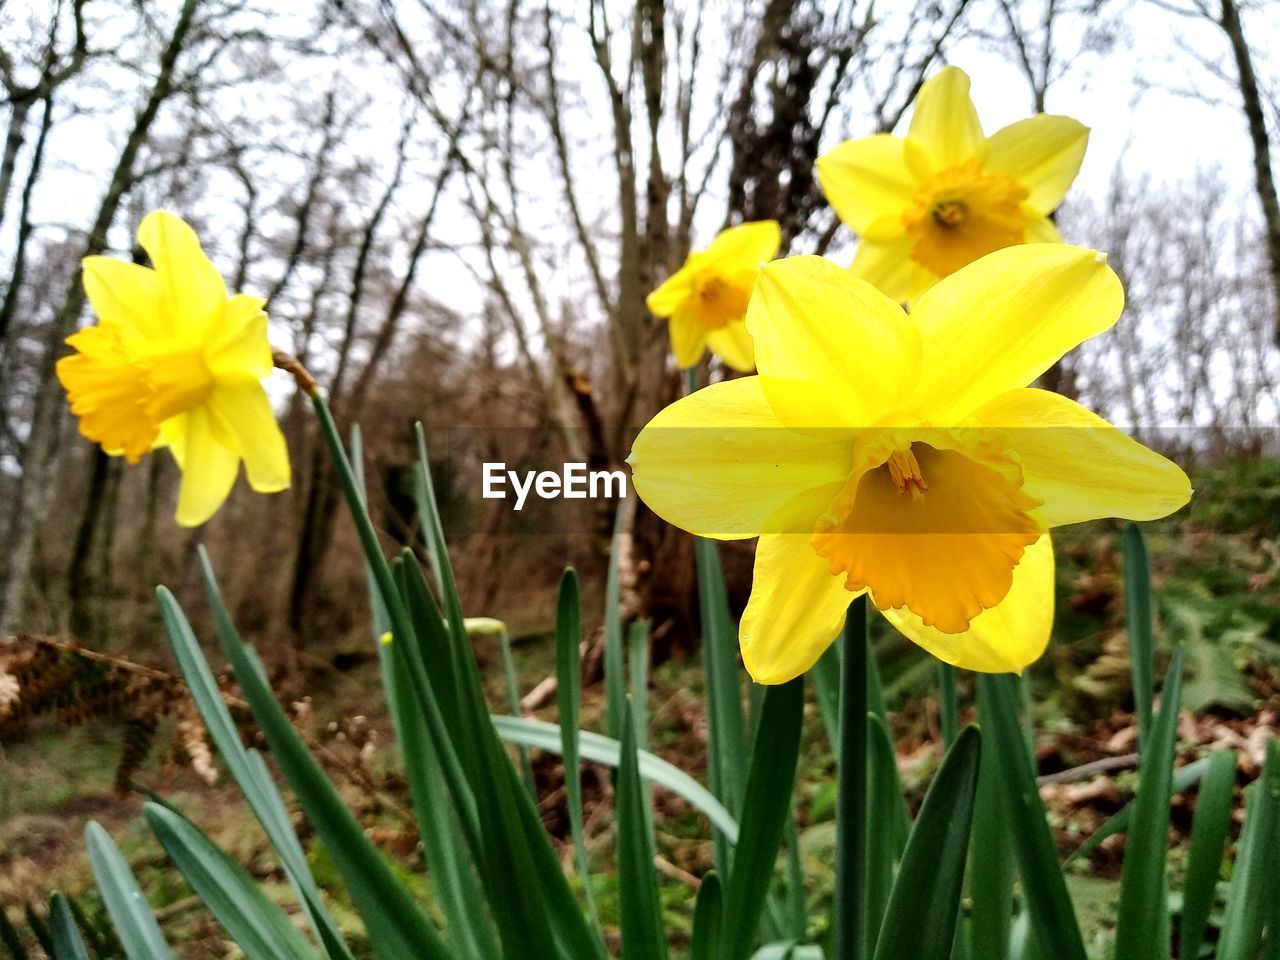 CLOSE-UP OF YELLOW DAFFODIL BLOOMING IN FIELD